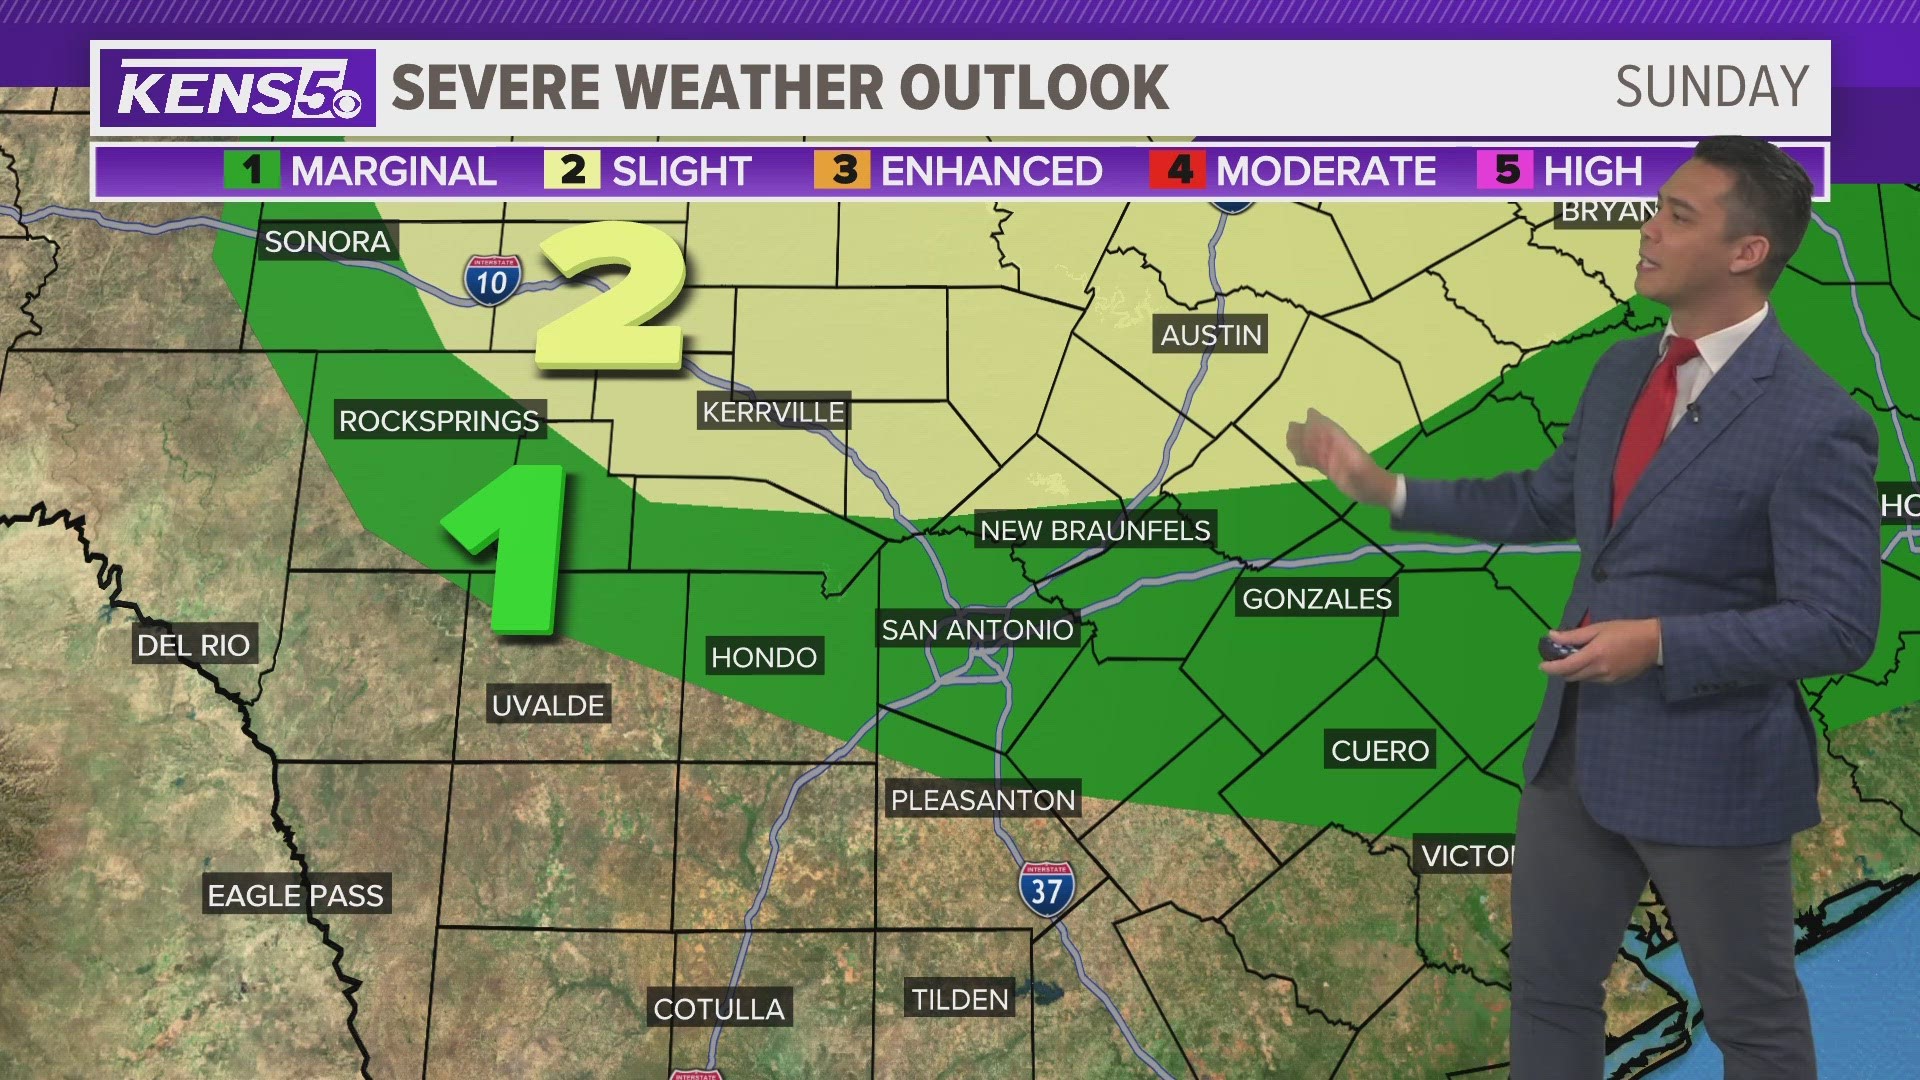 Severe weather threat tonight until midnight for northern counties and small risk for San Antonio.